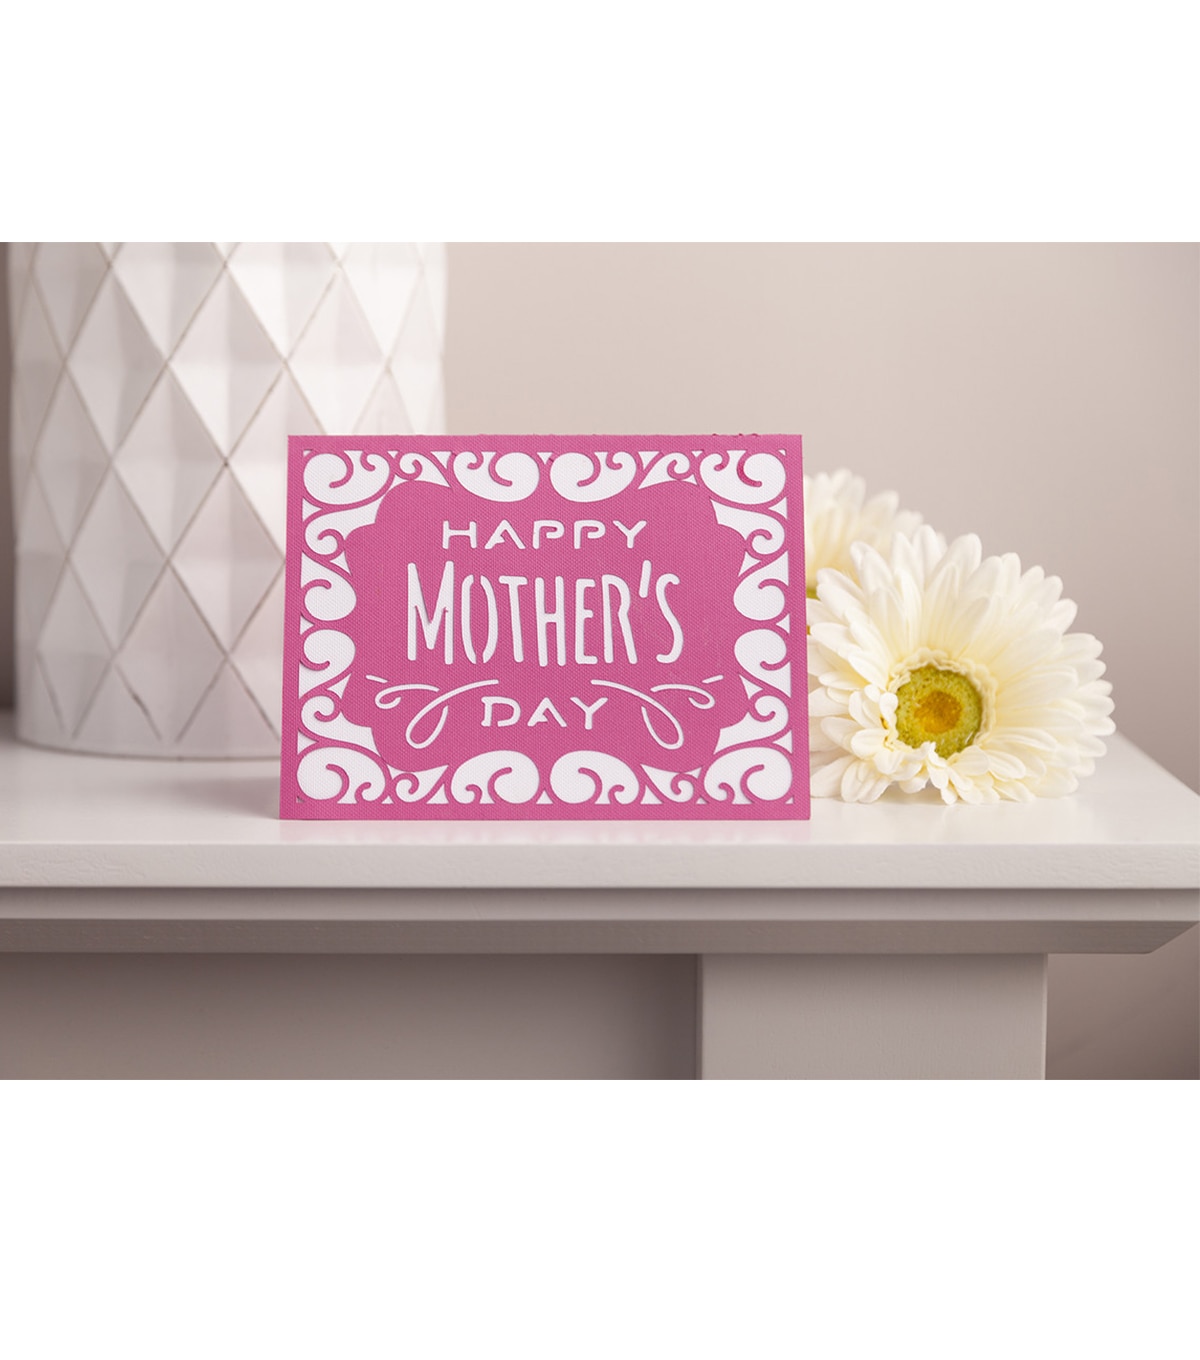 Download How To Make Happy Mother's Day Cricut Card | JOANN